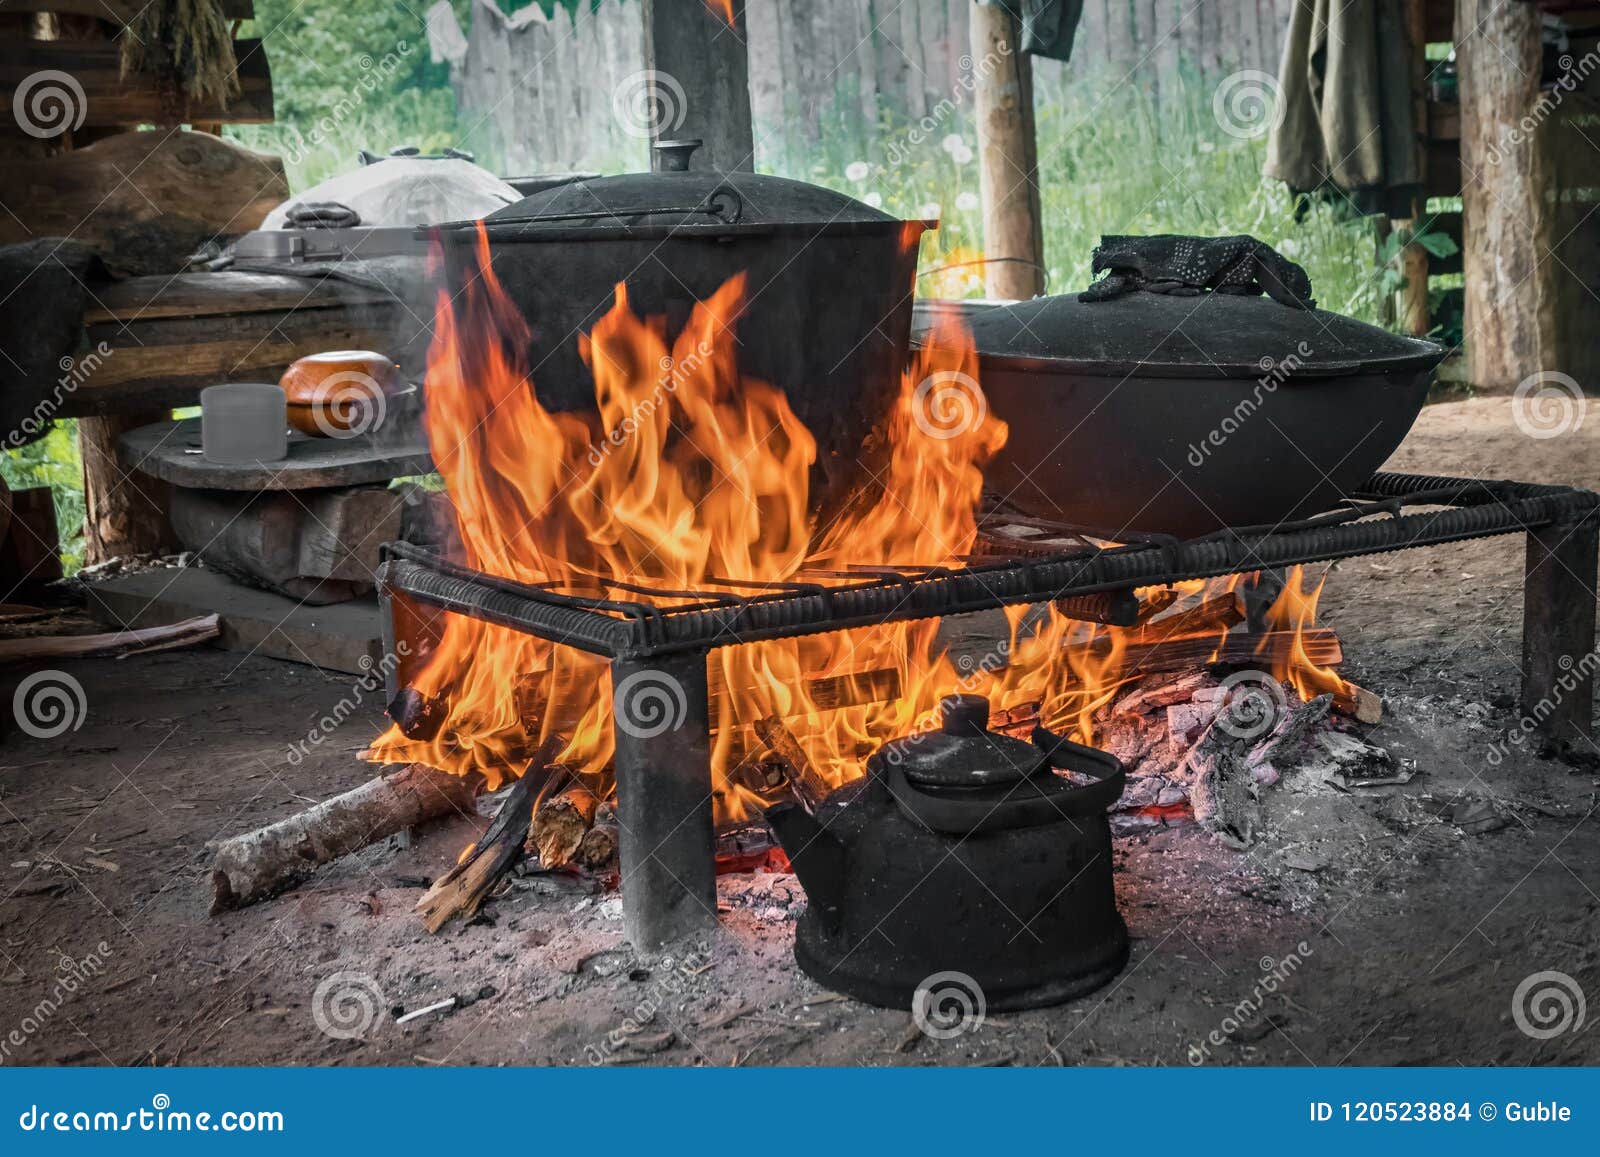 Cook Food On Burning Campfire. Cooking On An Open Fire ...